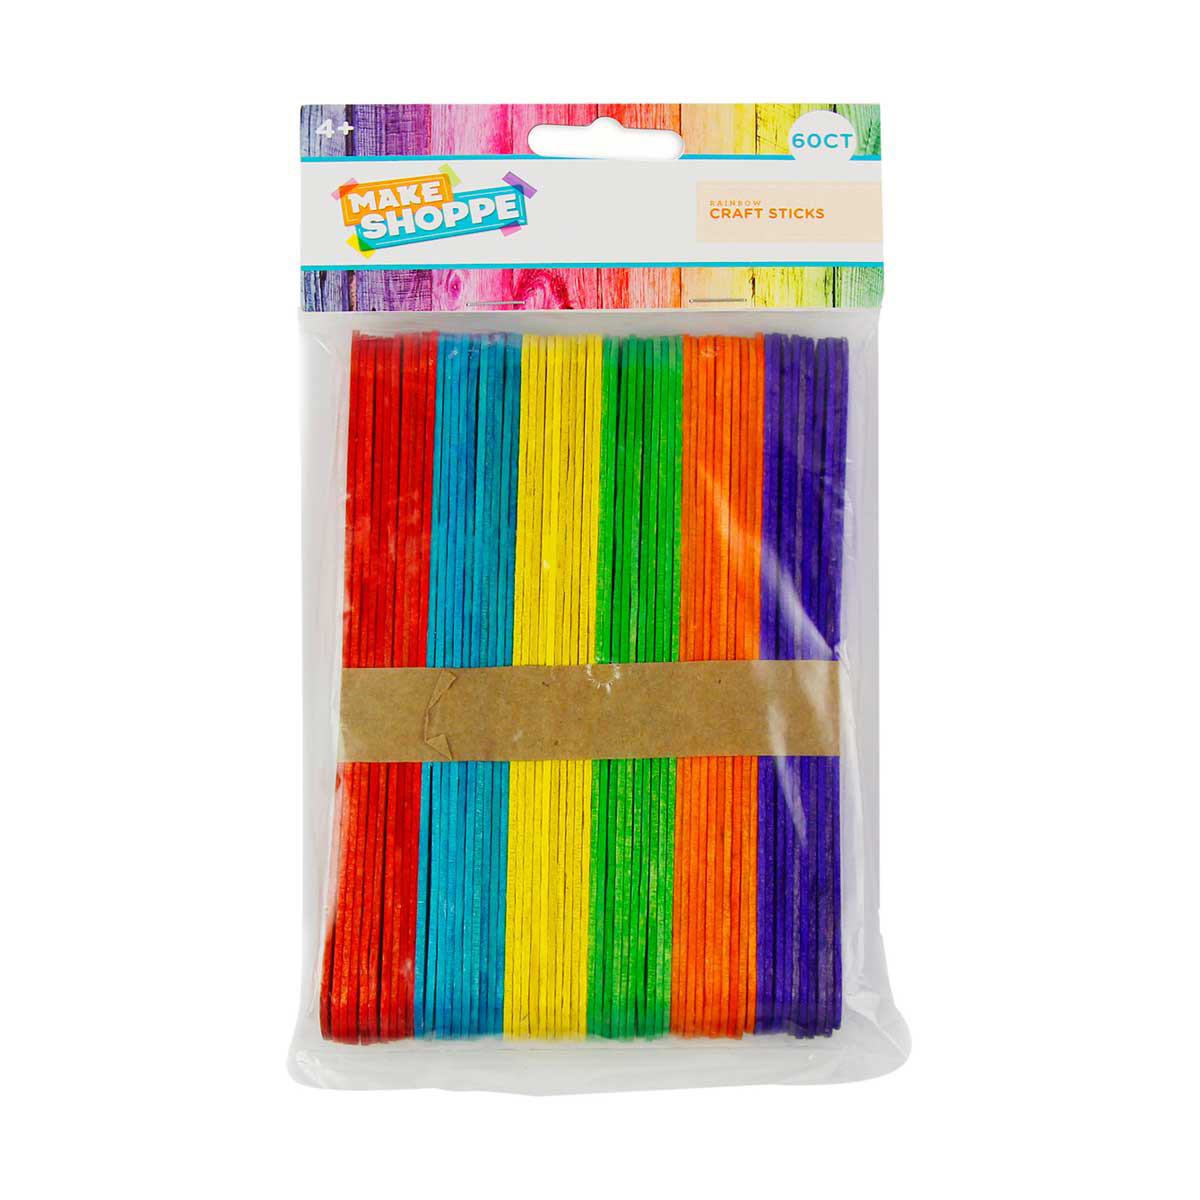 Make Shoppe Jumbo Craft Sticks, Colored, 60 Count, 0.78 X 5.9In in